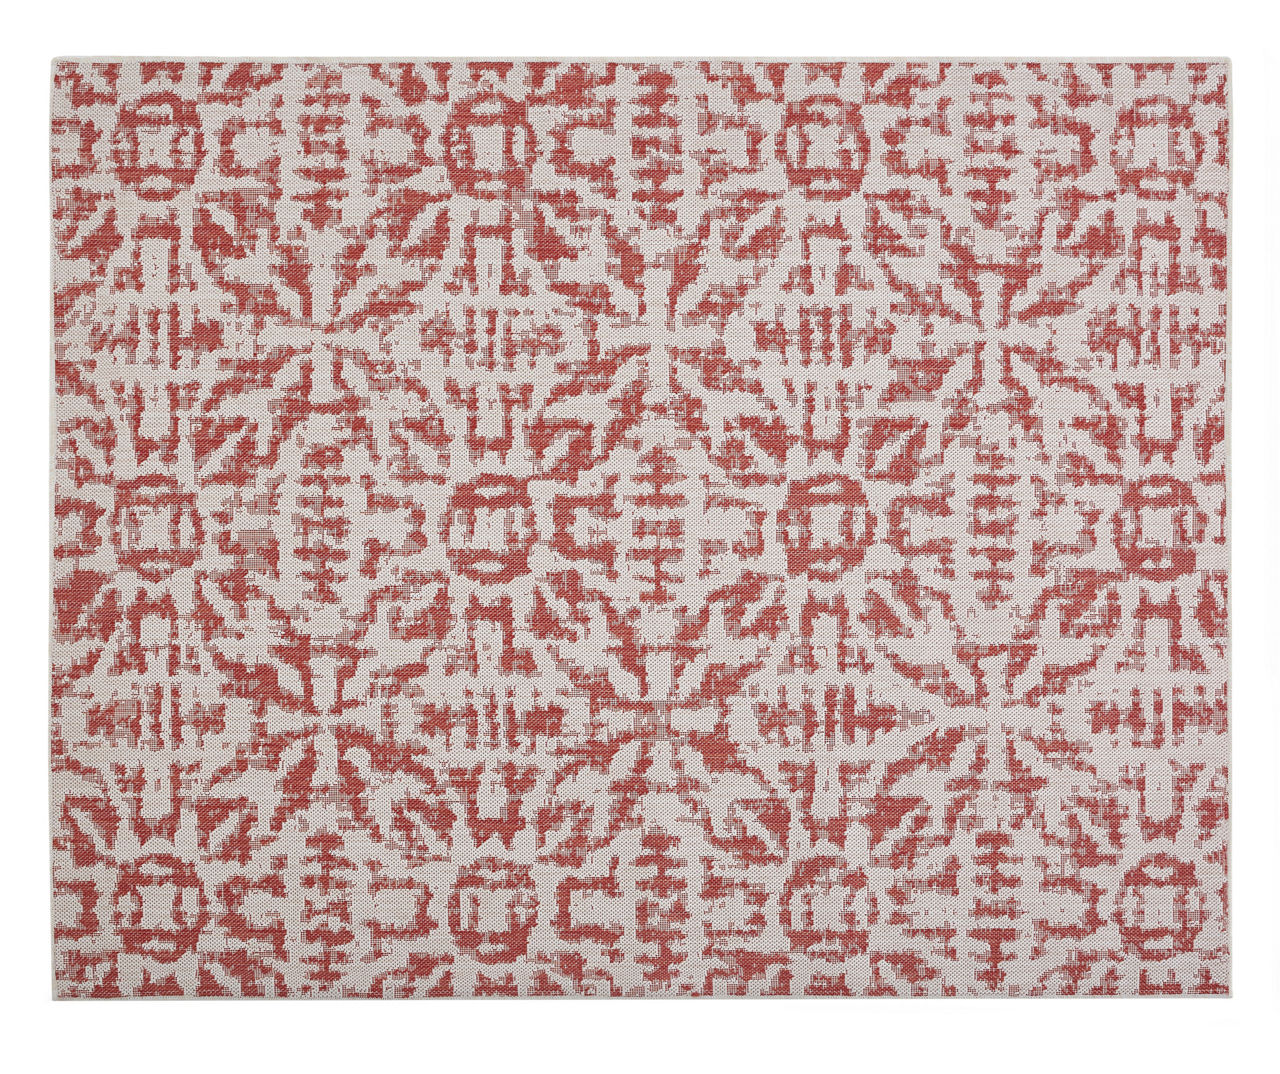 Red Moroccan Tile Outdoor Area Rug, (5'3" x 7')